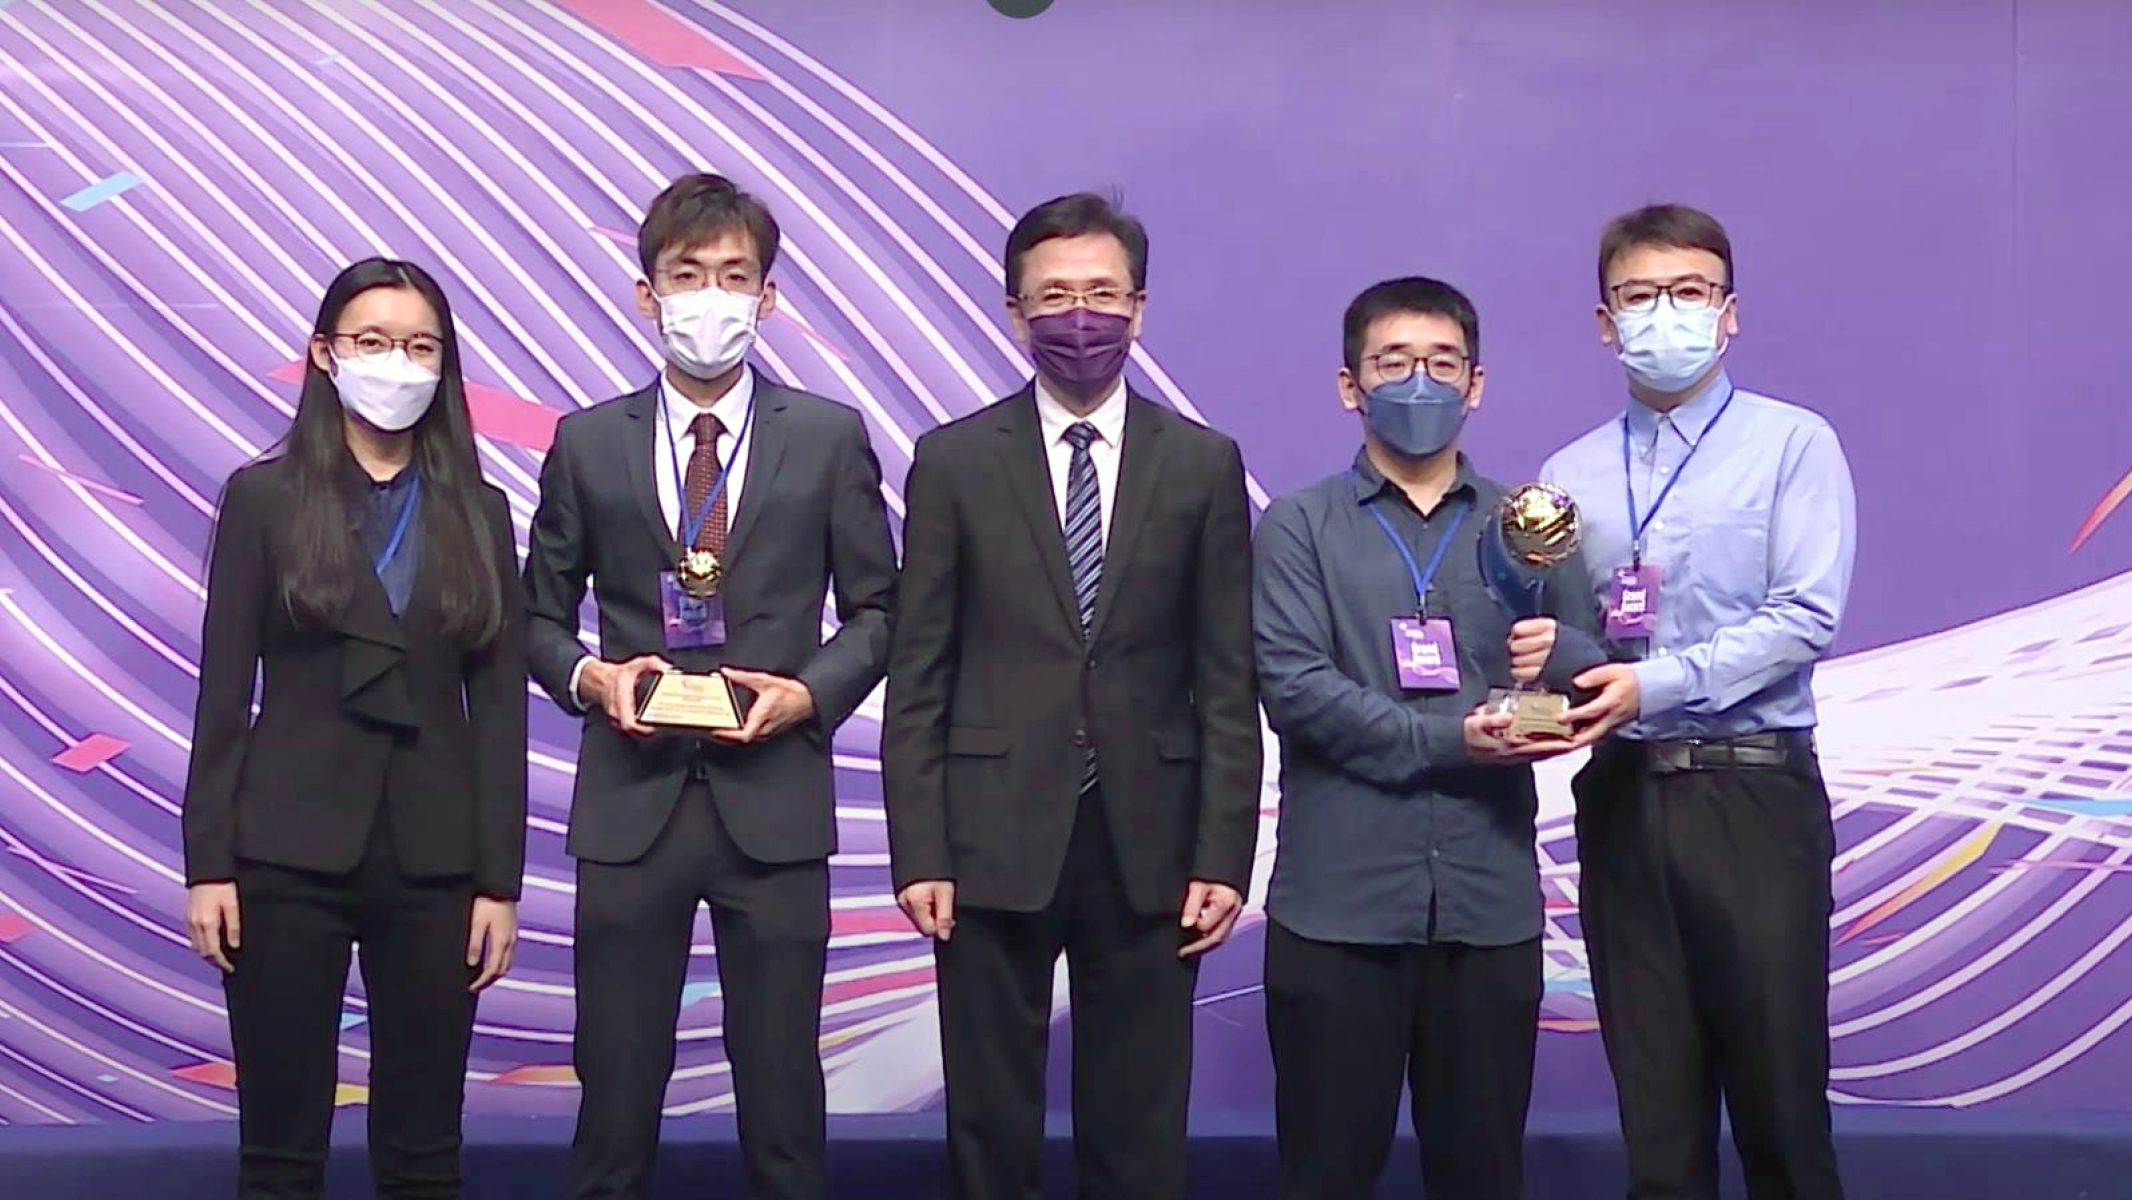 Kwok Hin-chi (left), Tsang Chin-lok (second from left), Li Chengxi (second from right), and Ir Dr Zheng Pai (right) received the Hong Kong ICT Awards 2022 from Prof. Sun Dong, Secretary for Innovation, Technology and Industry (centre).